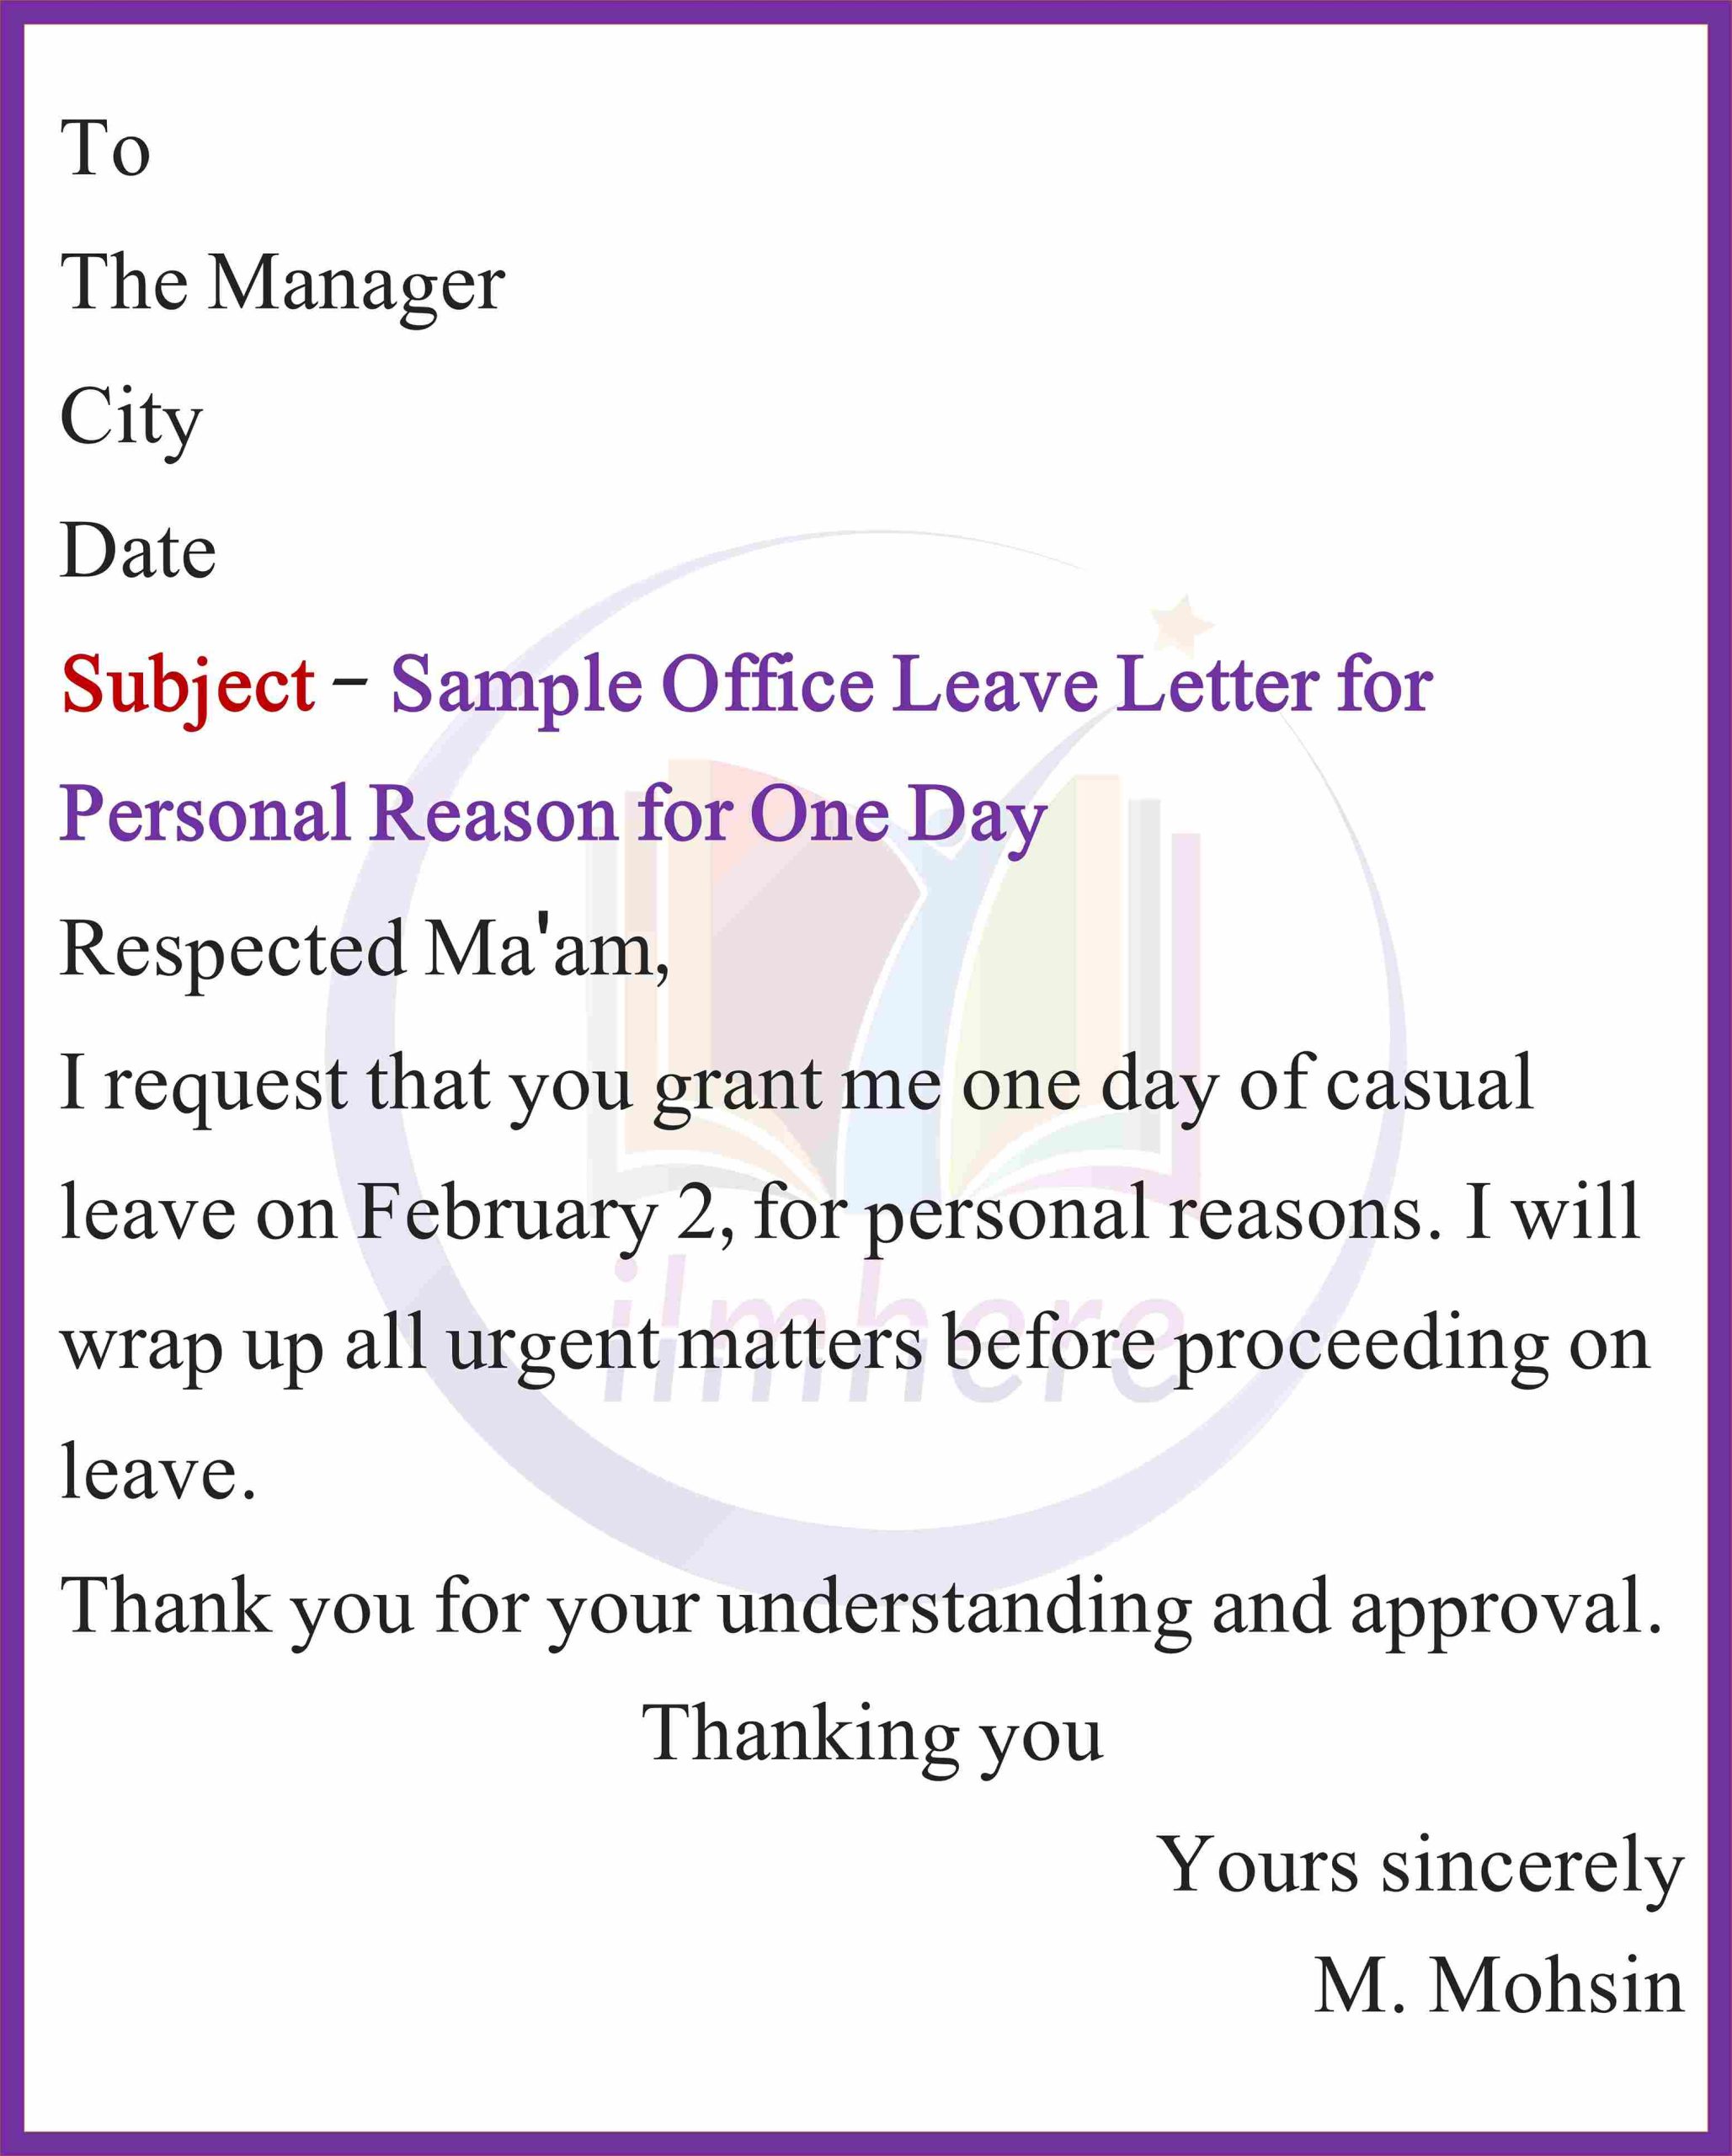 Sample Leave Letter for Personal Reason for One Day